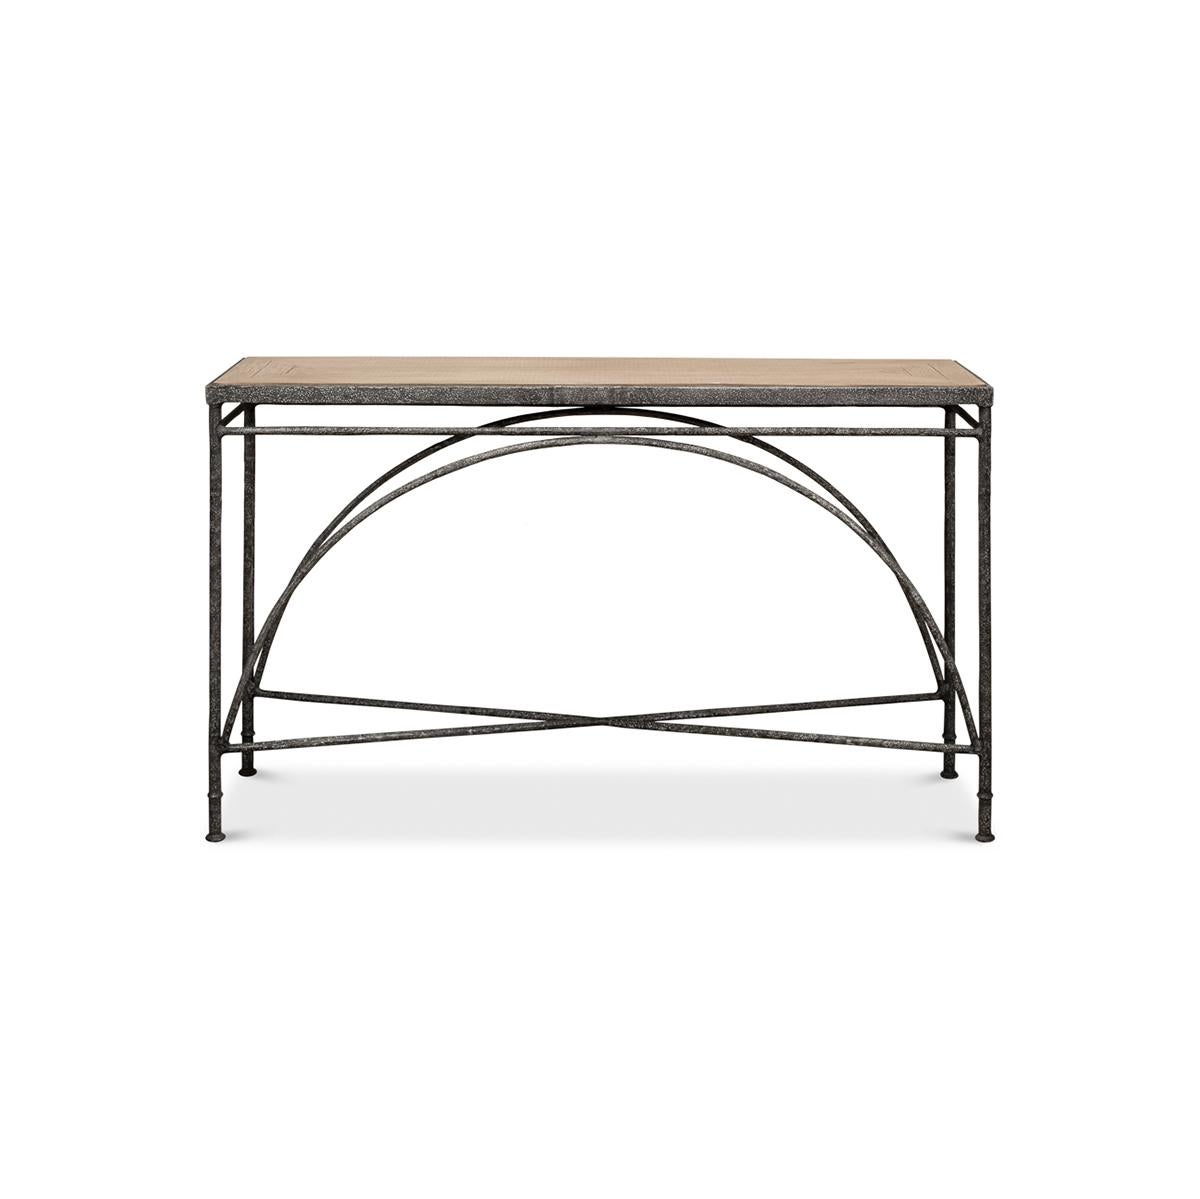 Industrial iron console table with a pine veneered top and cast iron frame base, with an arched central support and a stretcher base.

Dimensions: 54